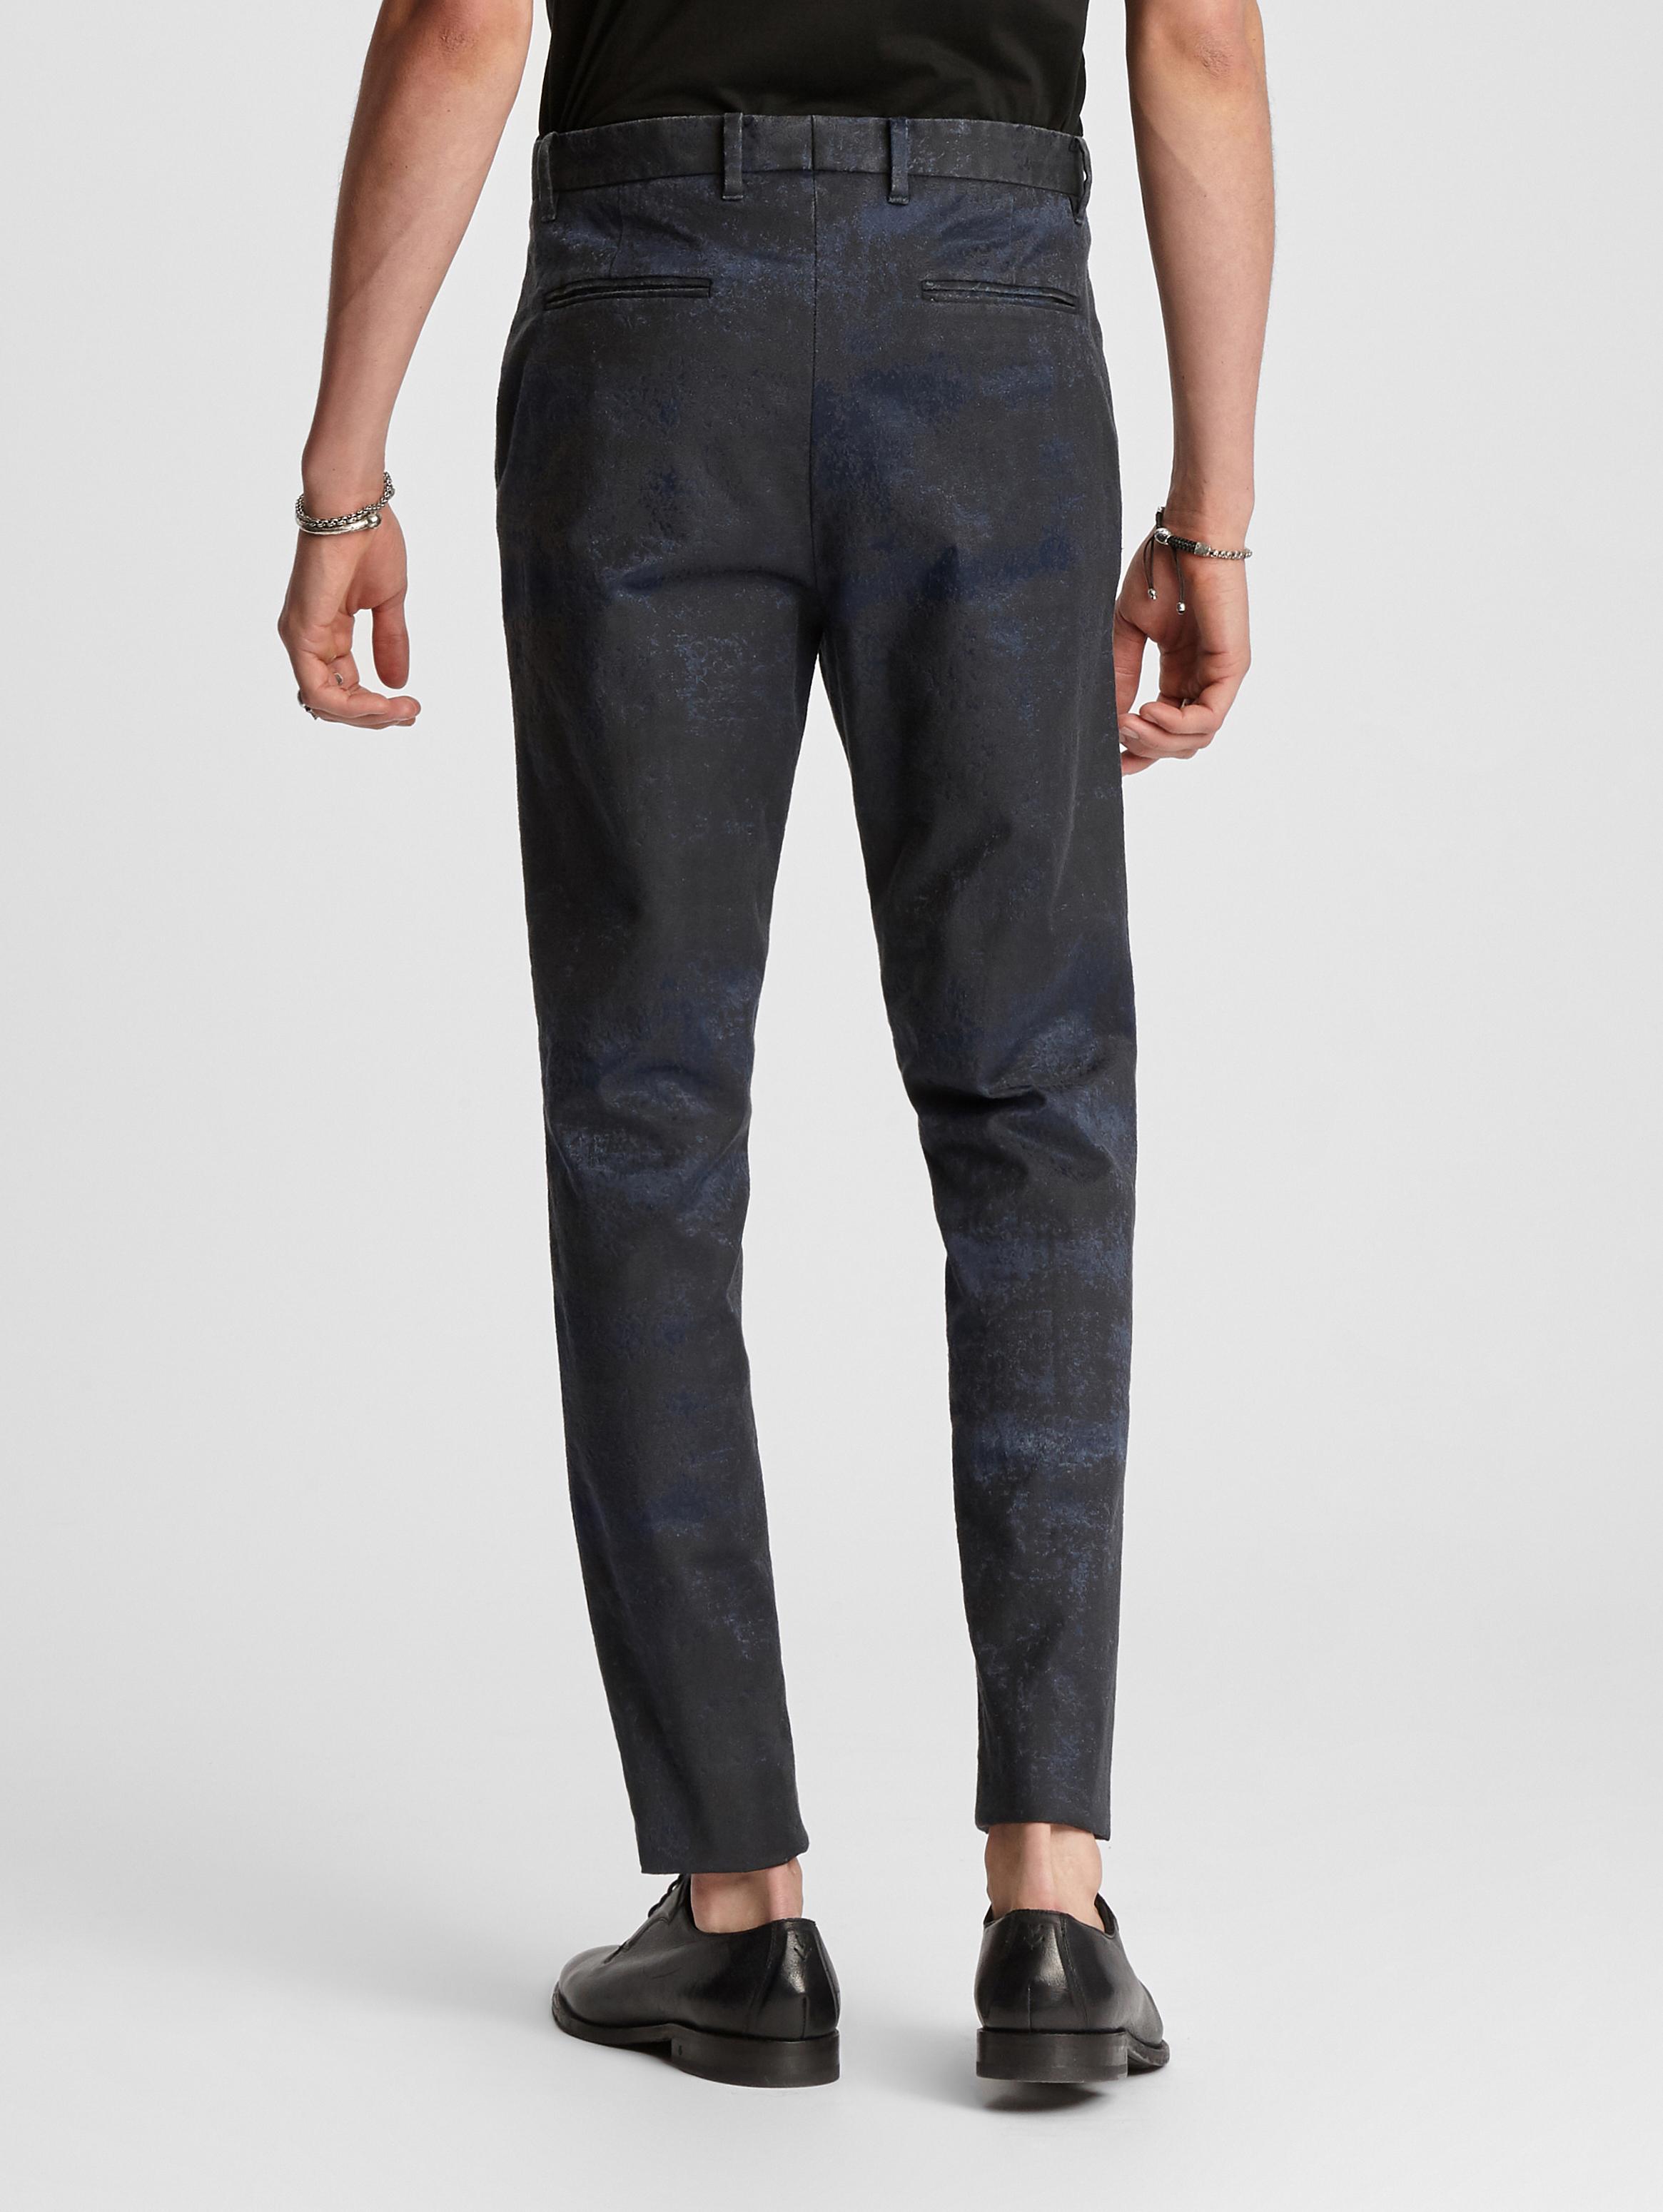 ABSTRACT JACQUARD ESSEX PANT image number 2